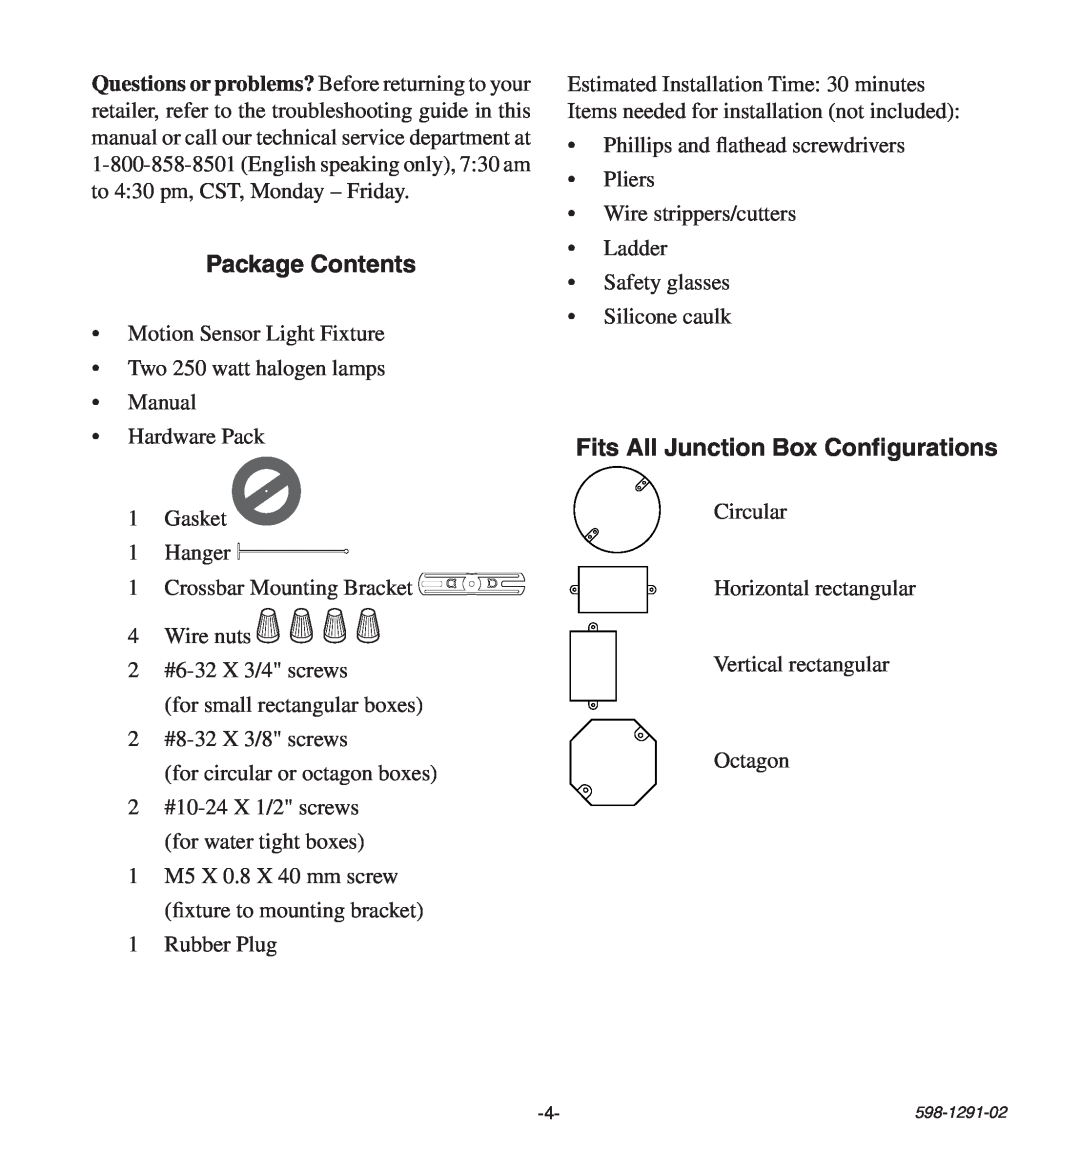 Heath Zenith UT-9260-WH, UT-9260-BZ manual Package Contents, Fits All Junction Box Configurations 